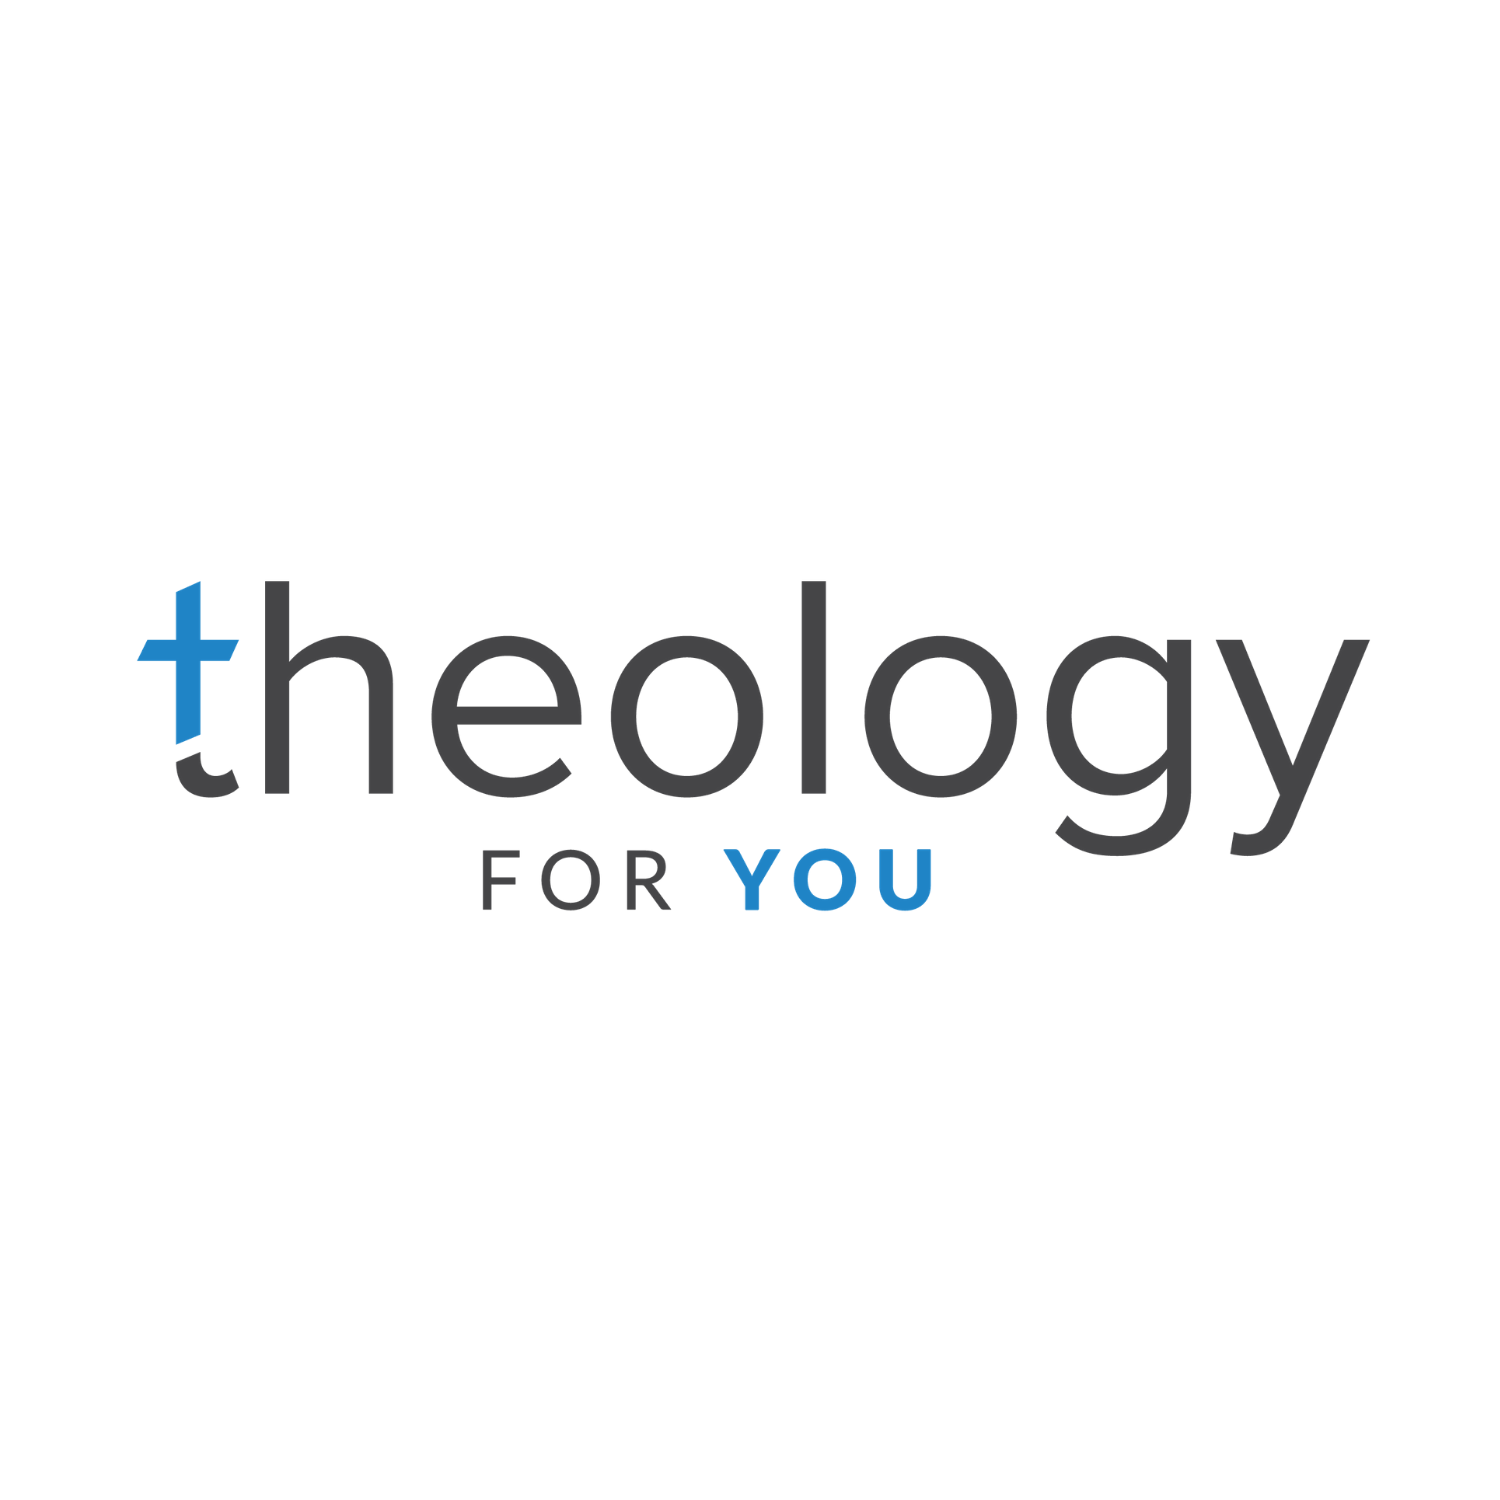 Theology For You